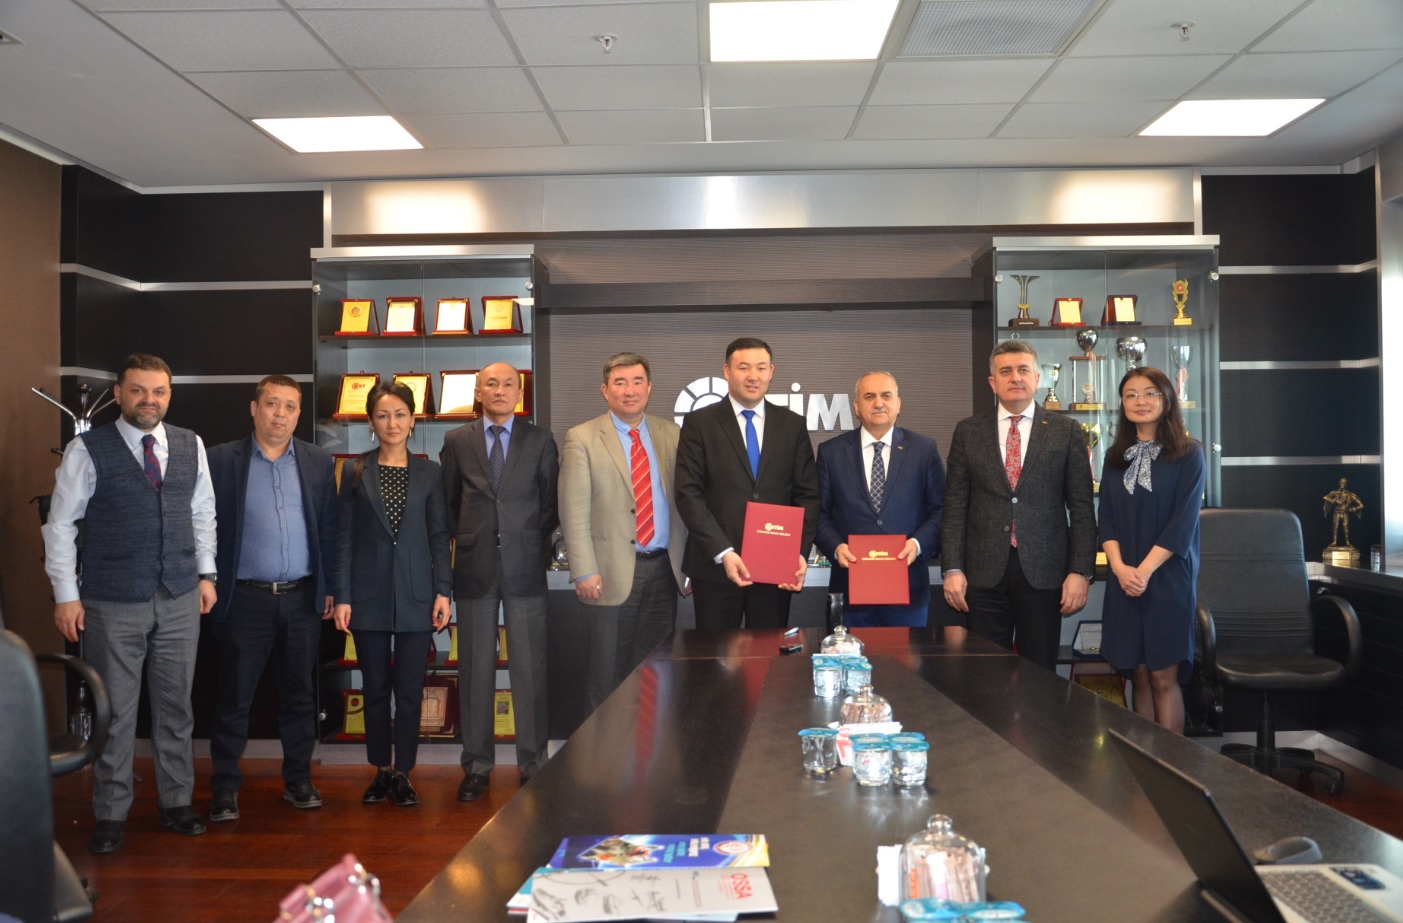 On February 21, 2019, with the assistance of the Embassy of the Kyrgyz Republic in Ankara, Director of the Investment Promotion and Protection Agency of the Kyrgyz Republic Shumkarbek Adilbek uulu visited Ankara. During the visit, Shumkarbek Adilbek uulu met with the Deputy Chairman of the Union of Chambers and Commodity Exchanges of Turkey Faik Yavuz and Chairman of the Board “OSTİM” Organized Industrial Region Orhan Aydın. 
During the meetings, issues of strengthening cooperation of the Kyrgyz Republic and the Republic of Turkey in the trade and economic sphere were discussed, and presentations on investment opportunities in the Kyrgyz Republic were presented. 
According to the results of the meeting of the Director of the Investment Promotion and Protection Agency of the Kyrgyz Republic Shumkarbek Adilbek uulu with the Deputy Chairman of the Union of Chambers and Commodity Exchanges of Turkey Faik Yavuz and Chairman of the Board “OSTİM” Organized Industrial Region Orhan Aydın has been signed the Memorandum of understanding. 
In addition, on February 20, 2019, an investment Roadshow was held in Istanbul city devoted to the promotion of investment opportunities of the Kyrgyz Republic and investment projects in agriculture and energy sectors at the Foreign Economic Relations Board of the Republic of Turkey (DEIK).
